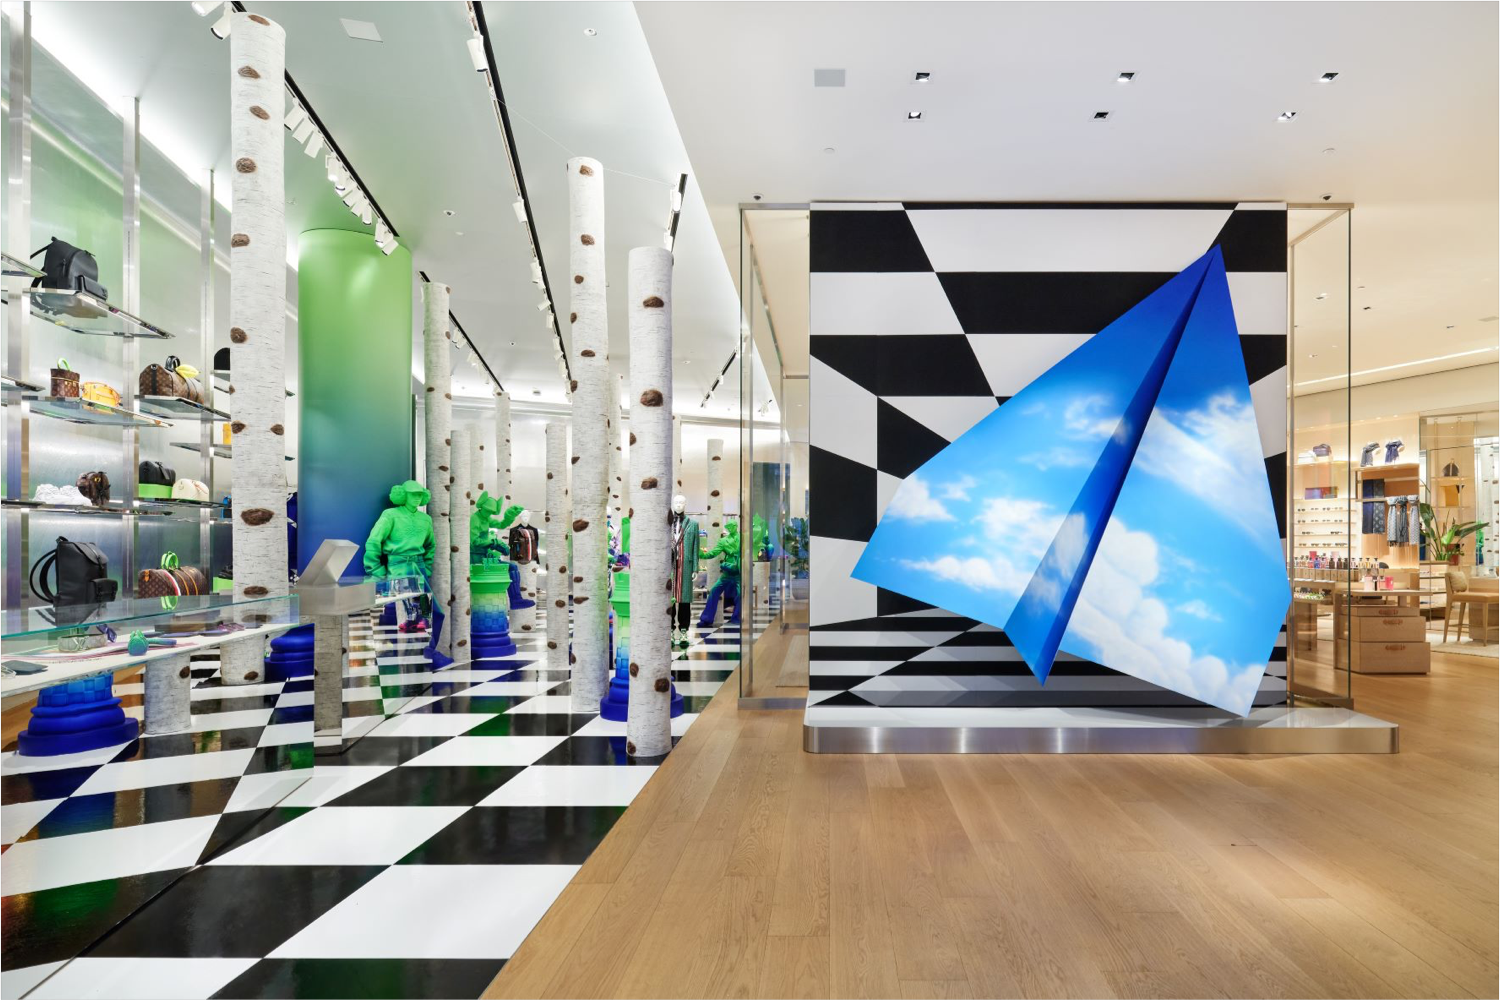 Louis Vuitton Opens in Ginza 